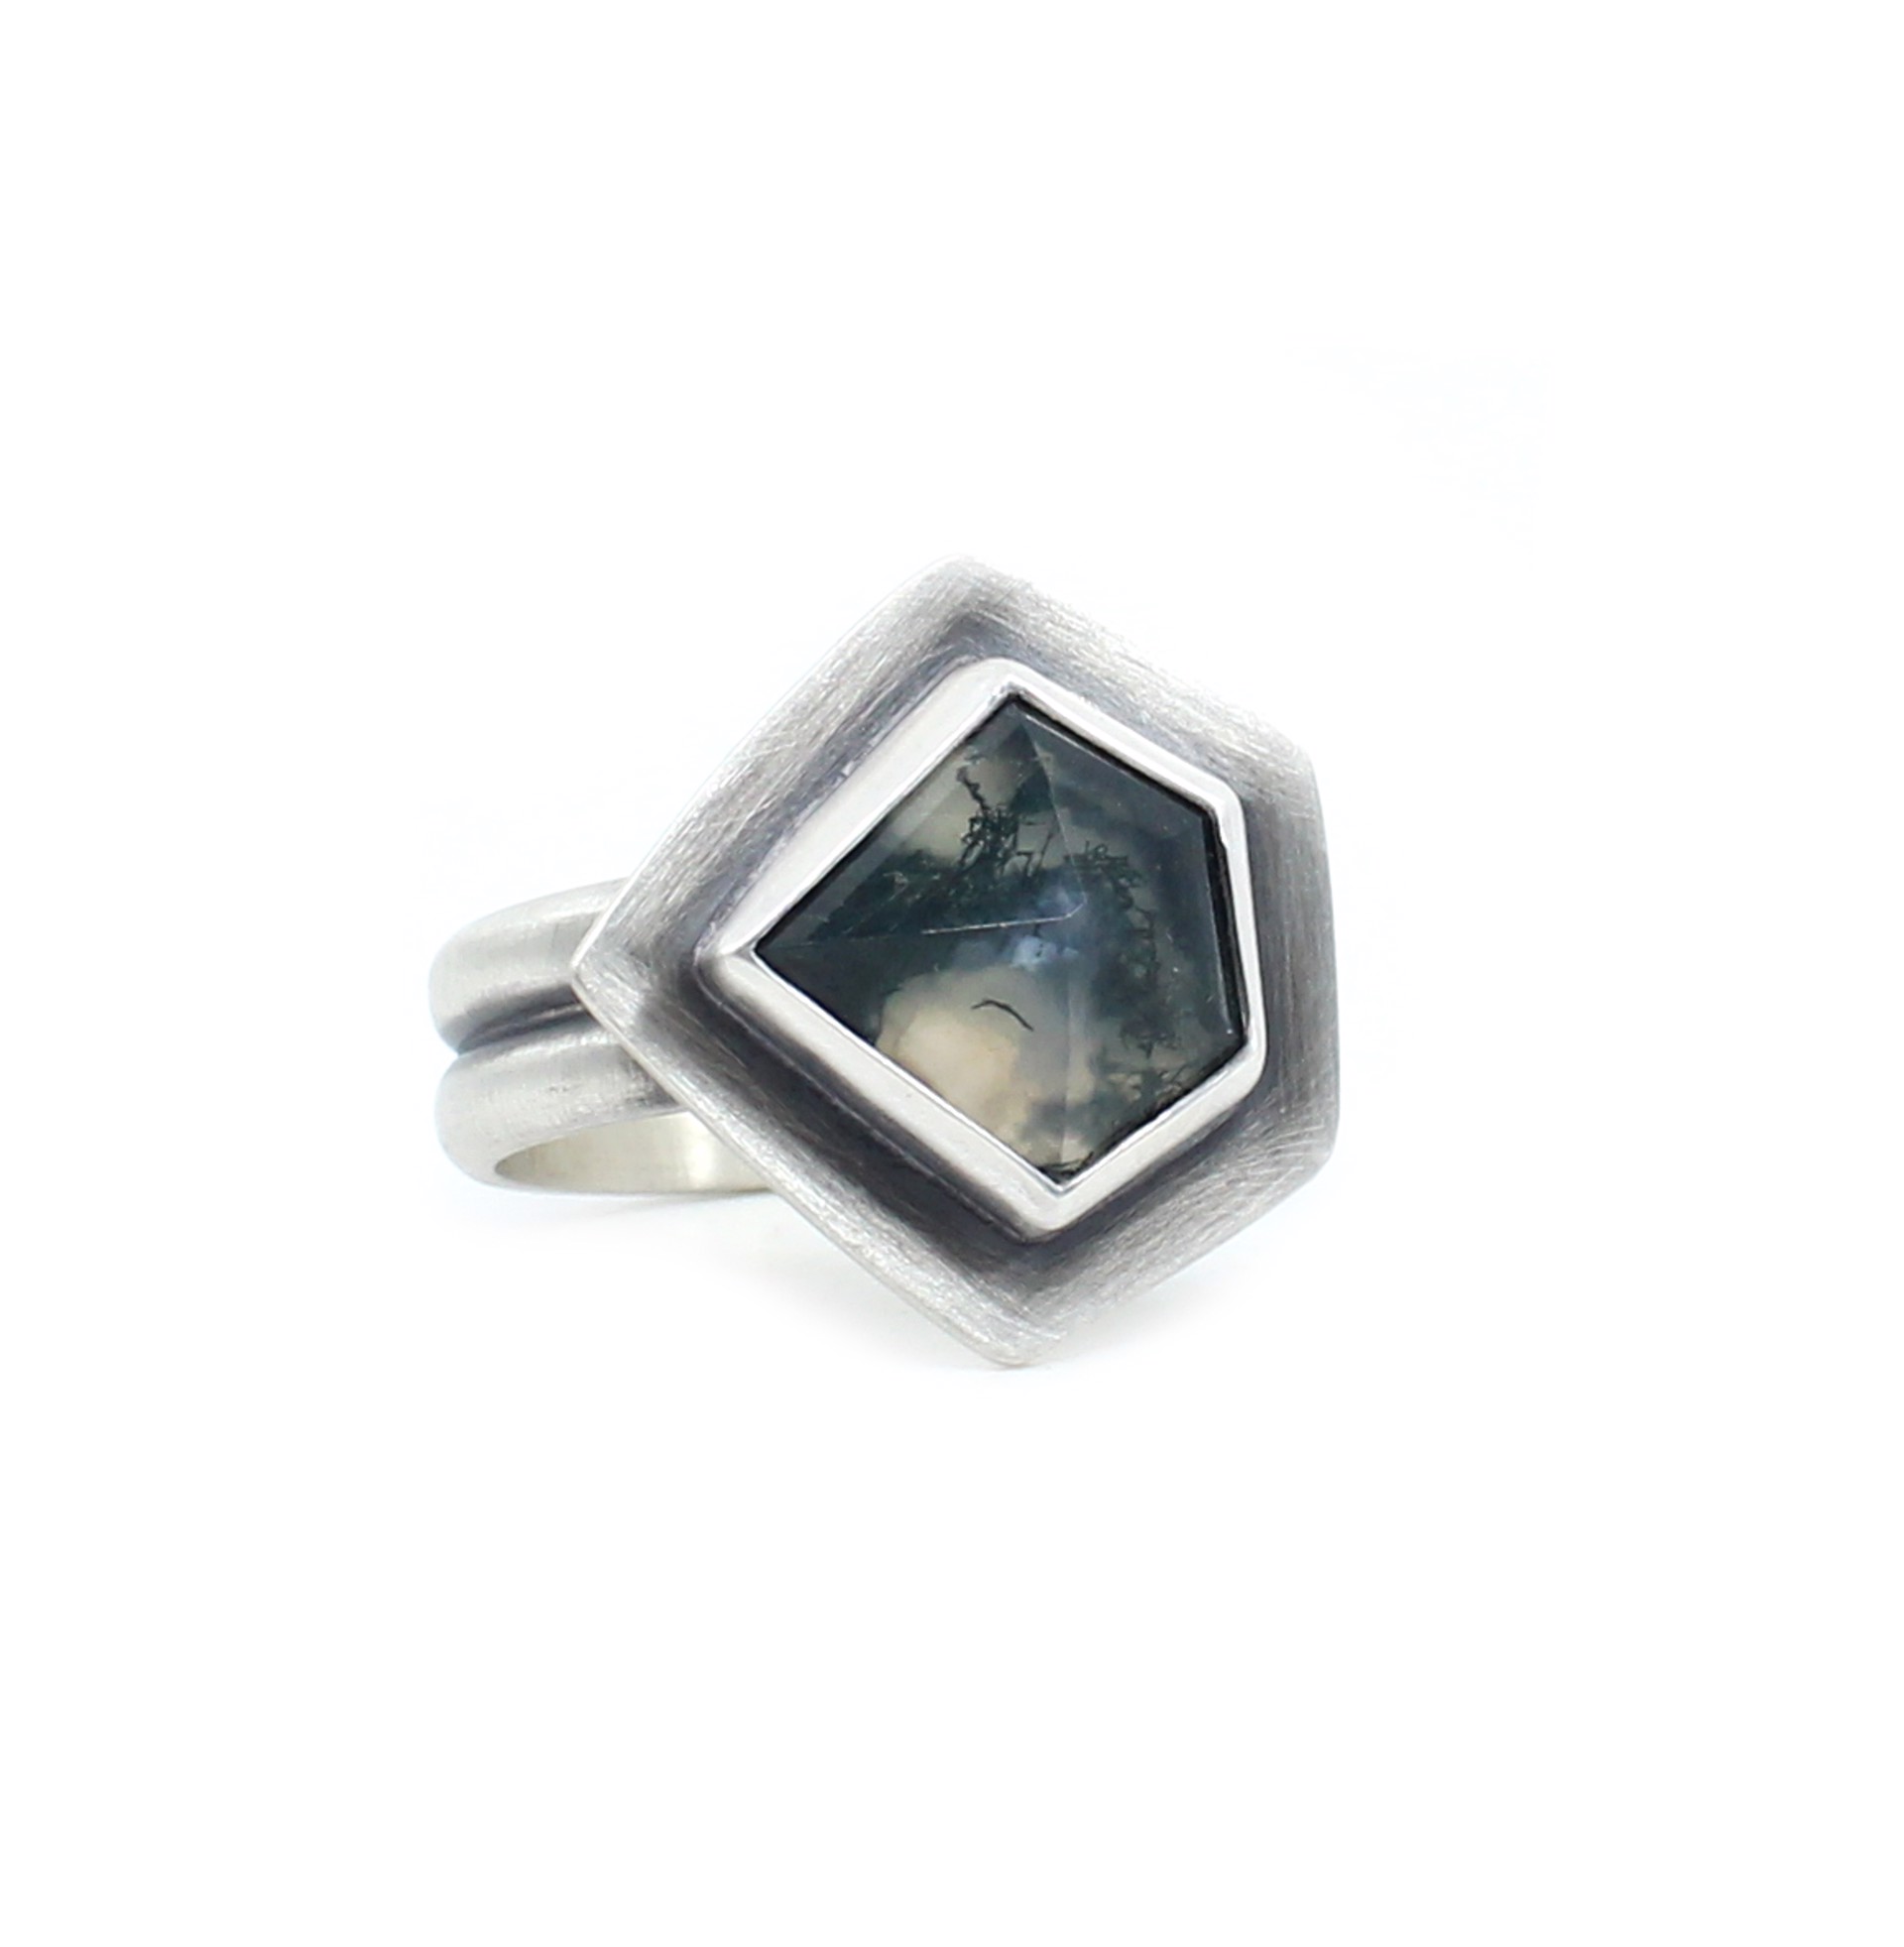 Moss Agate Pentagon Ring by Silicate & Silver